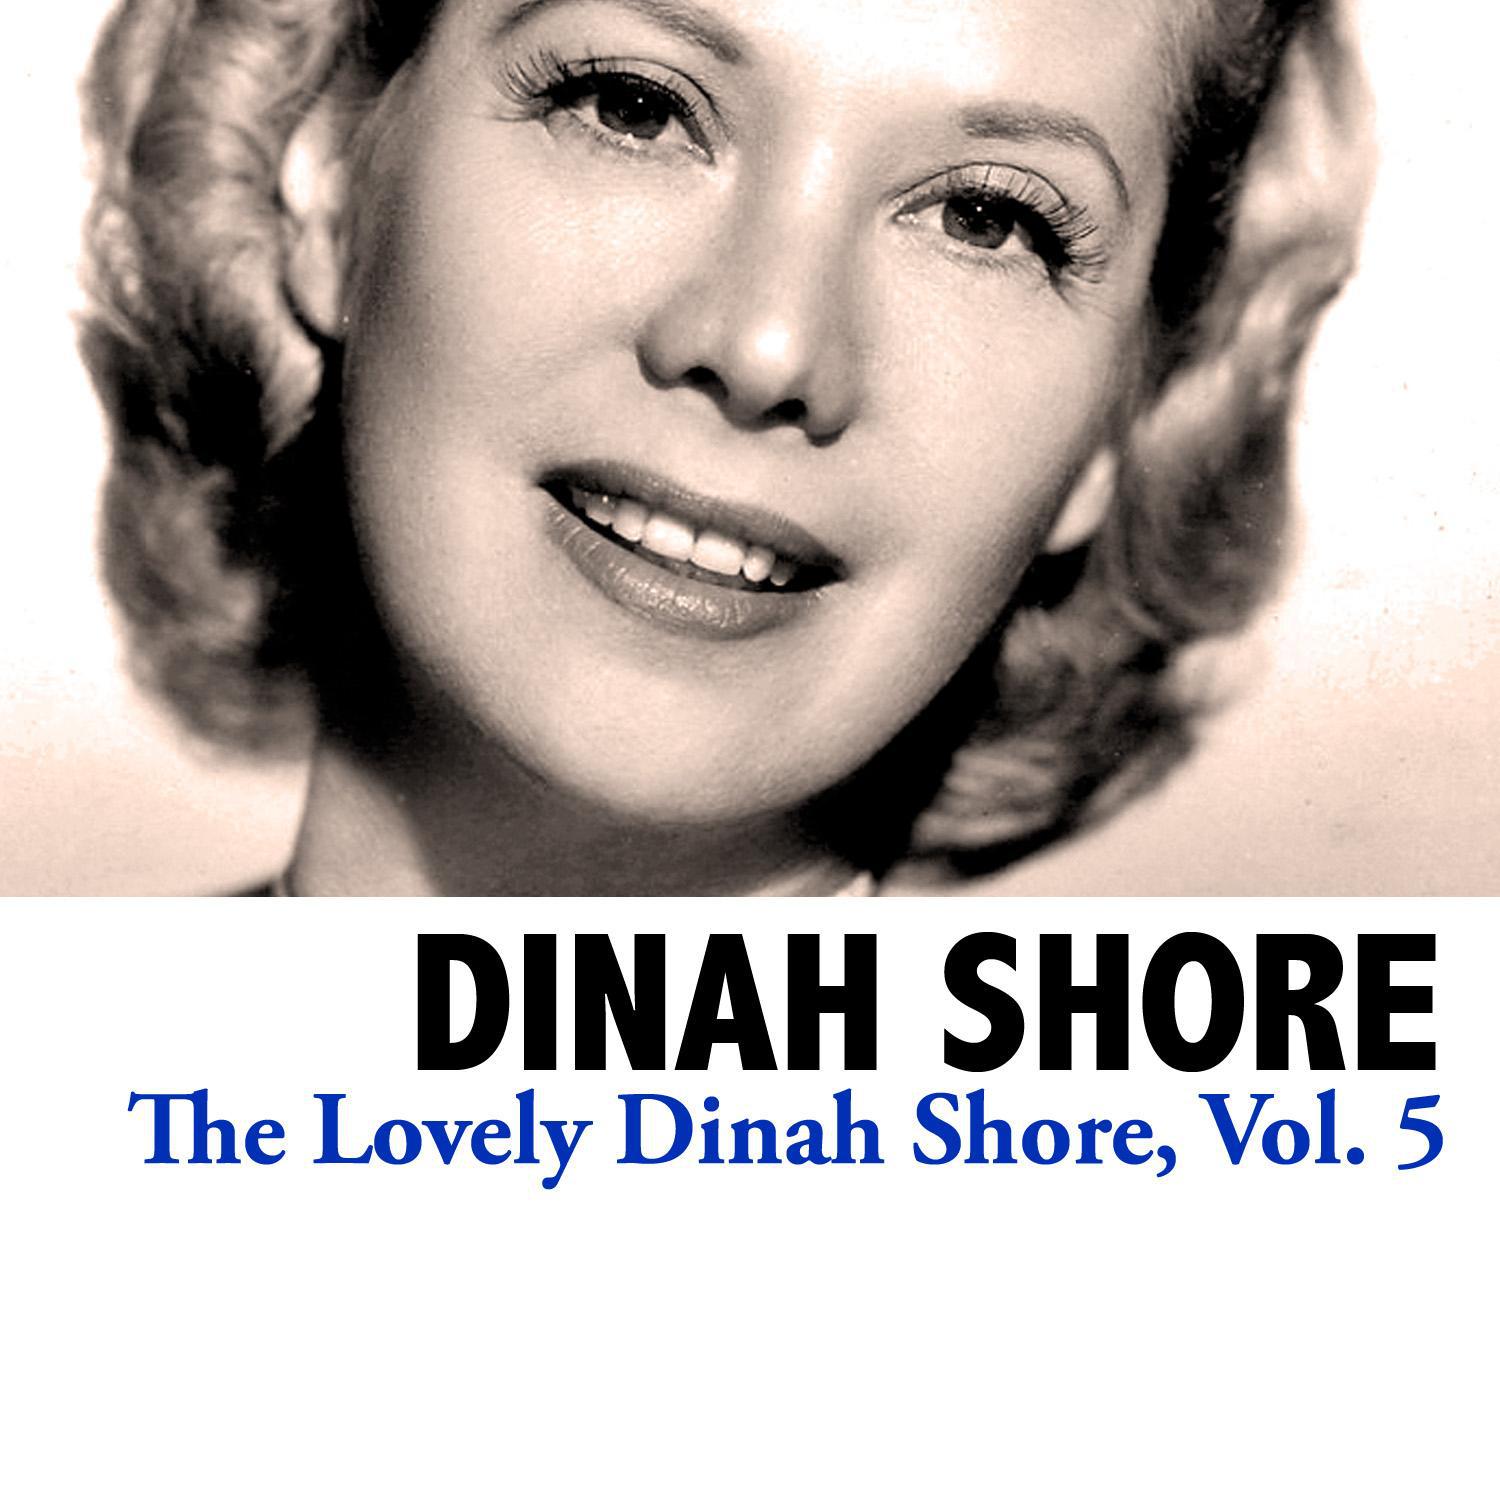 The Lovely Dinah Shore, Vol. 5专辑